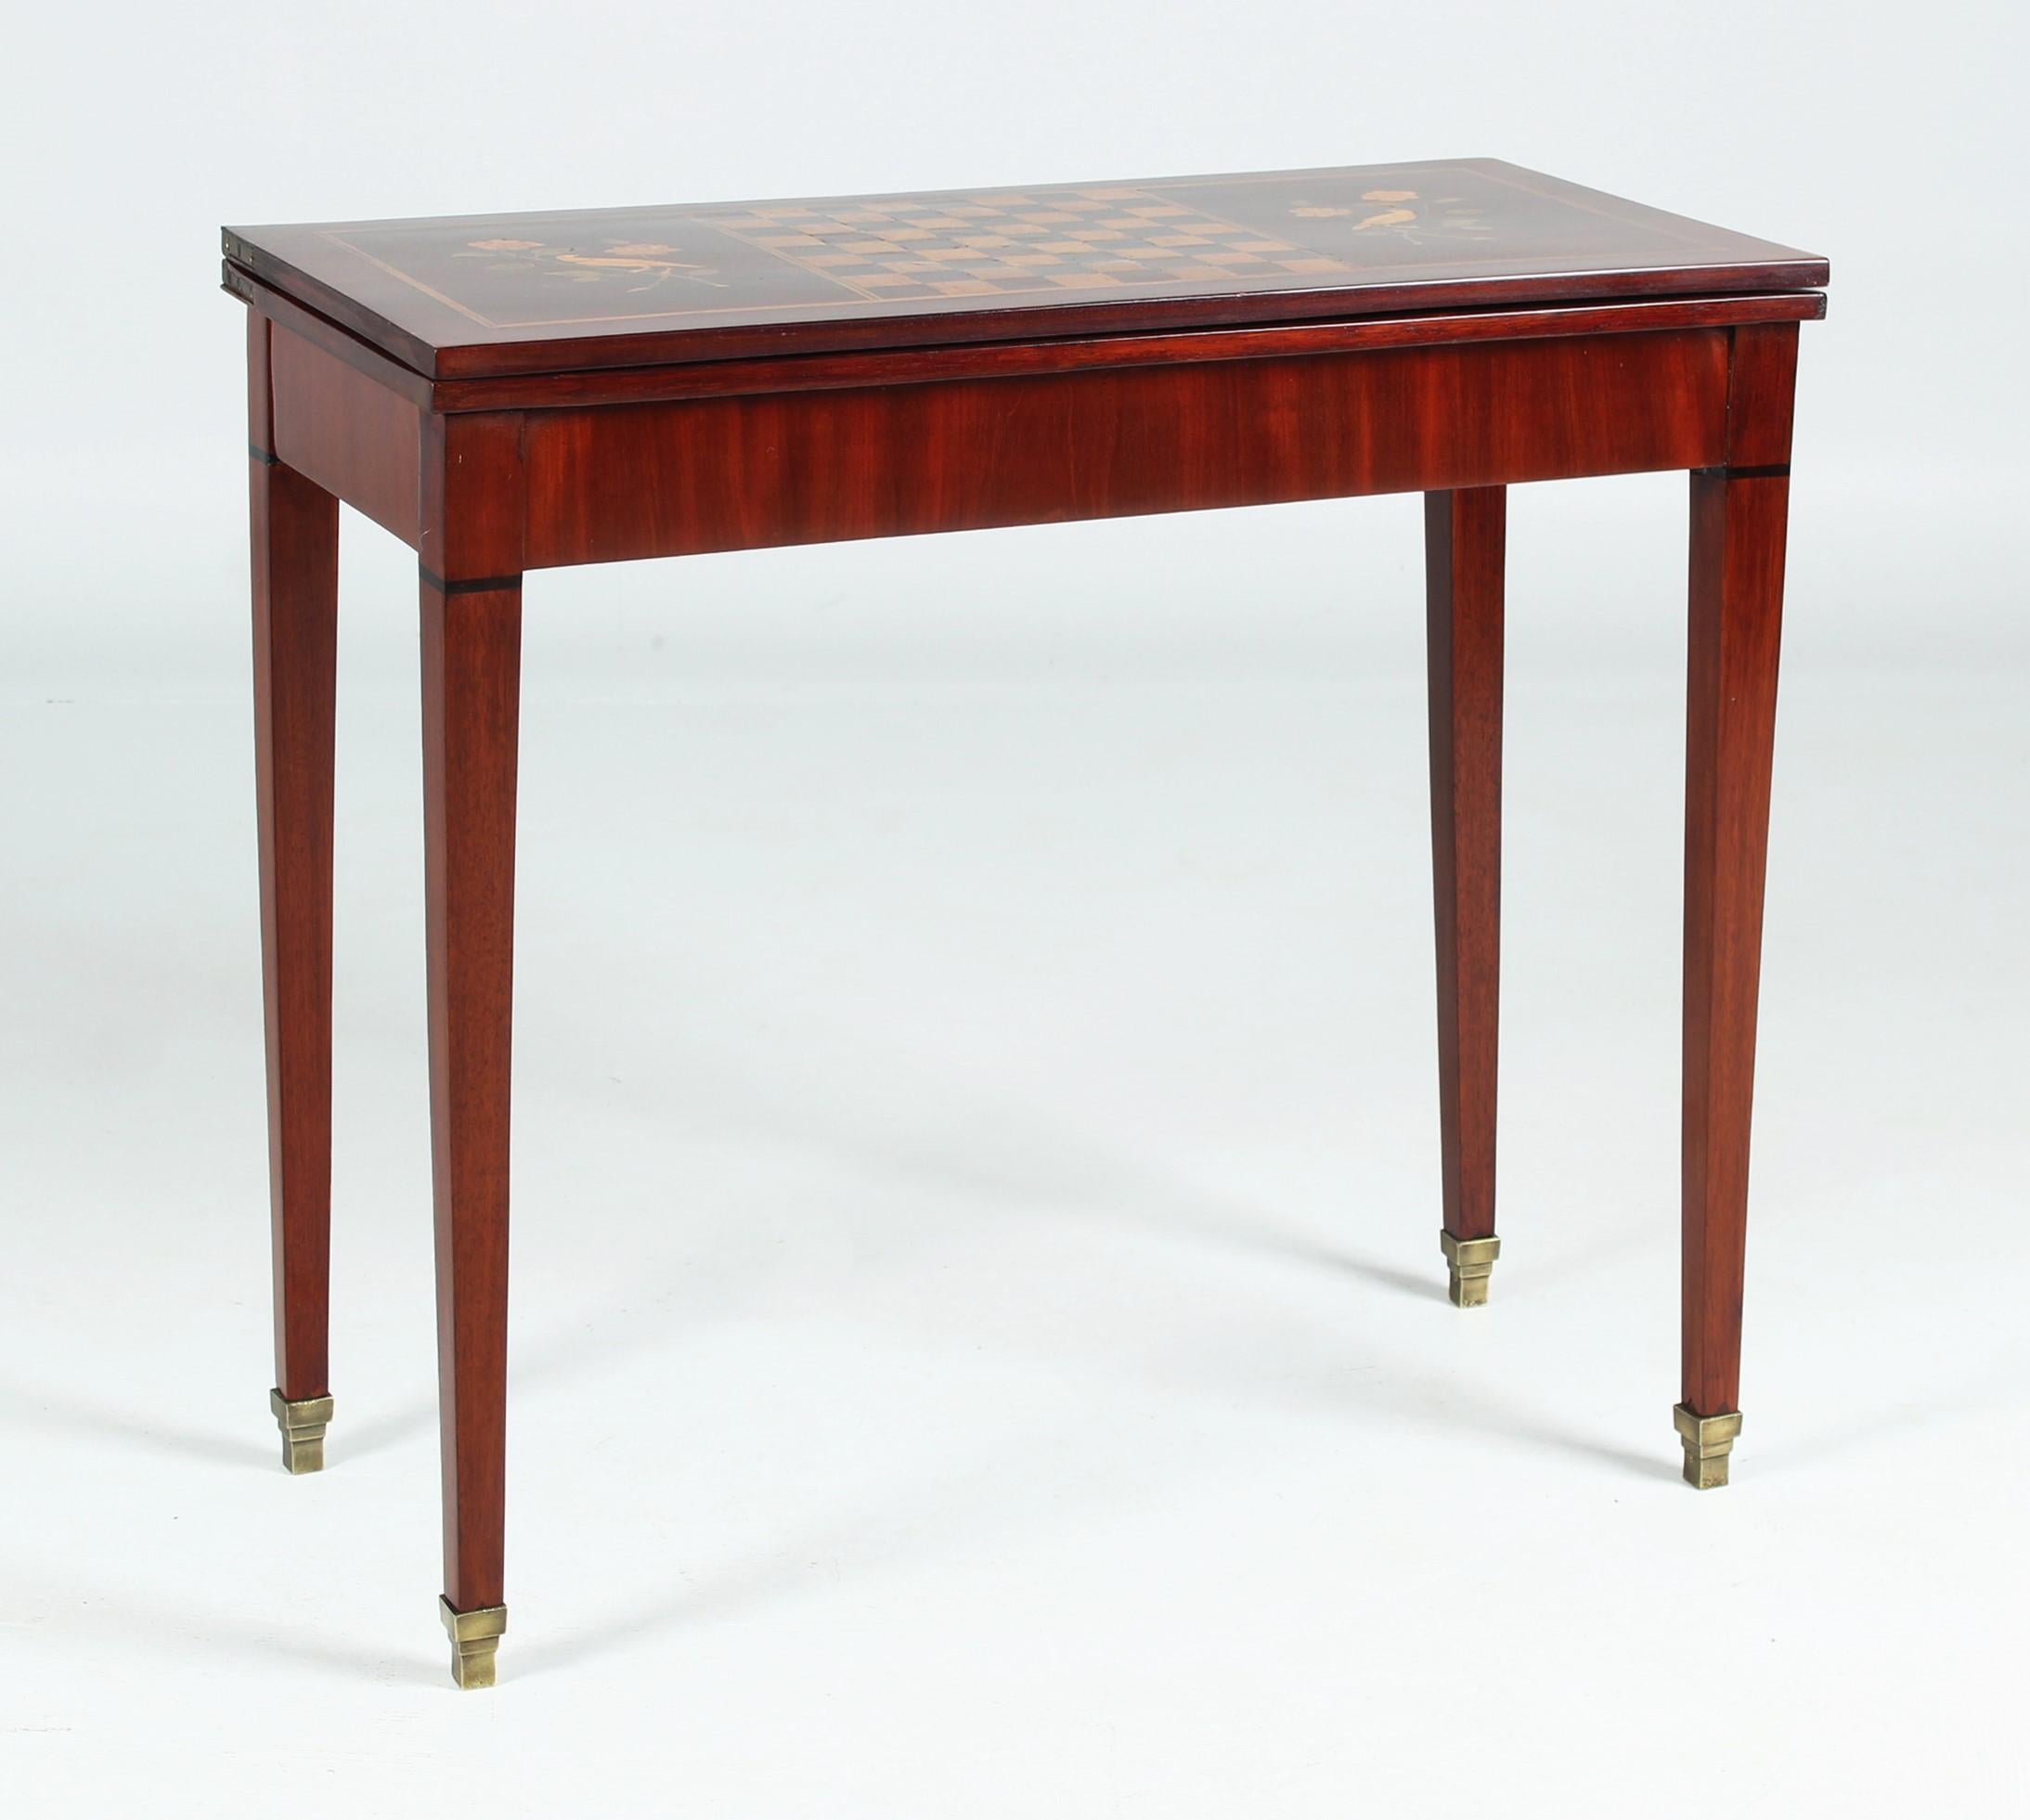 Antique chess and card table in Louis XVI style from the 19th century.

When closed, we see a console table standing on long pointed legs and in brass sabots.
The top is divided into three sections by thread inlays. On the left and right we see a